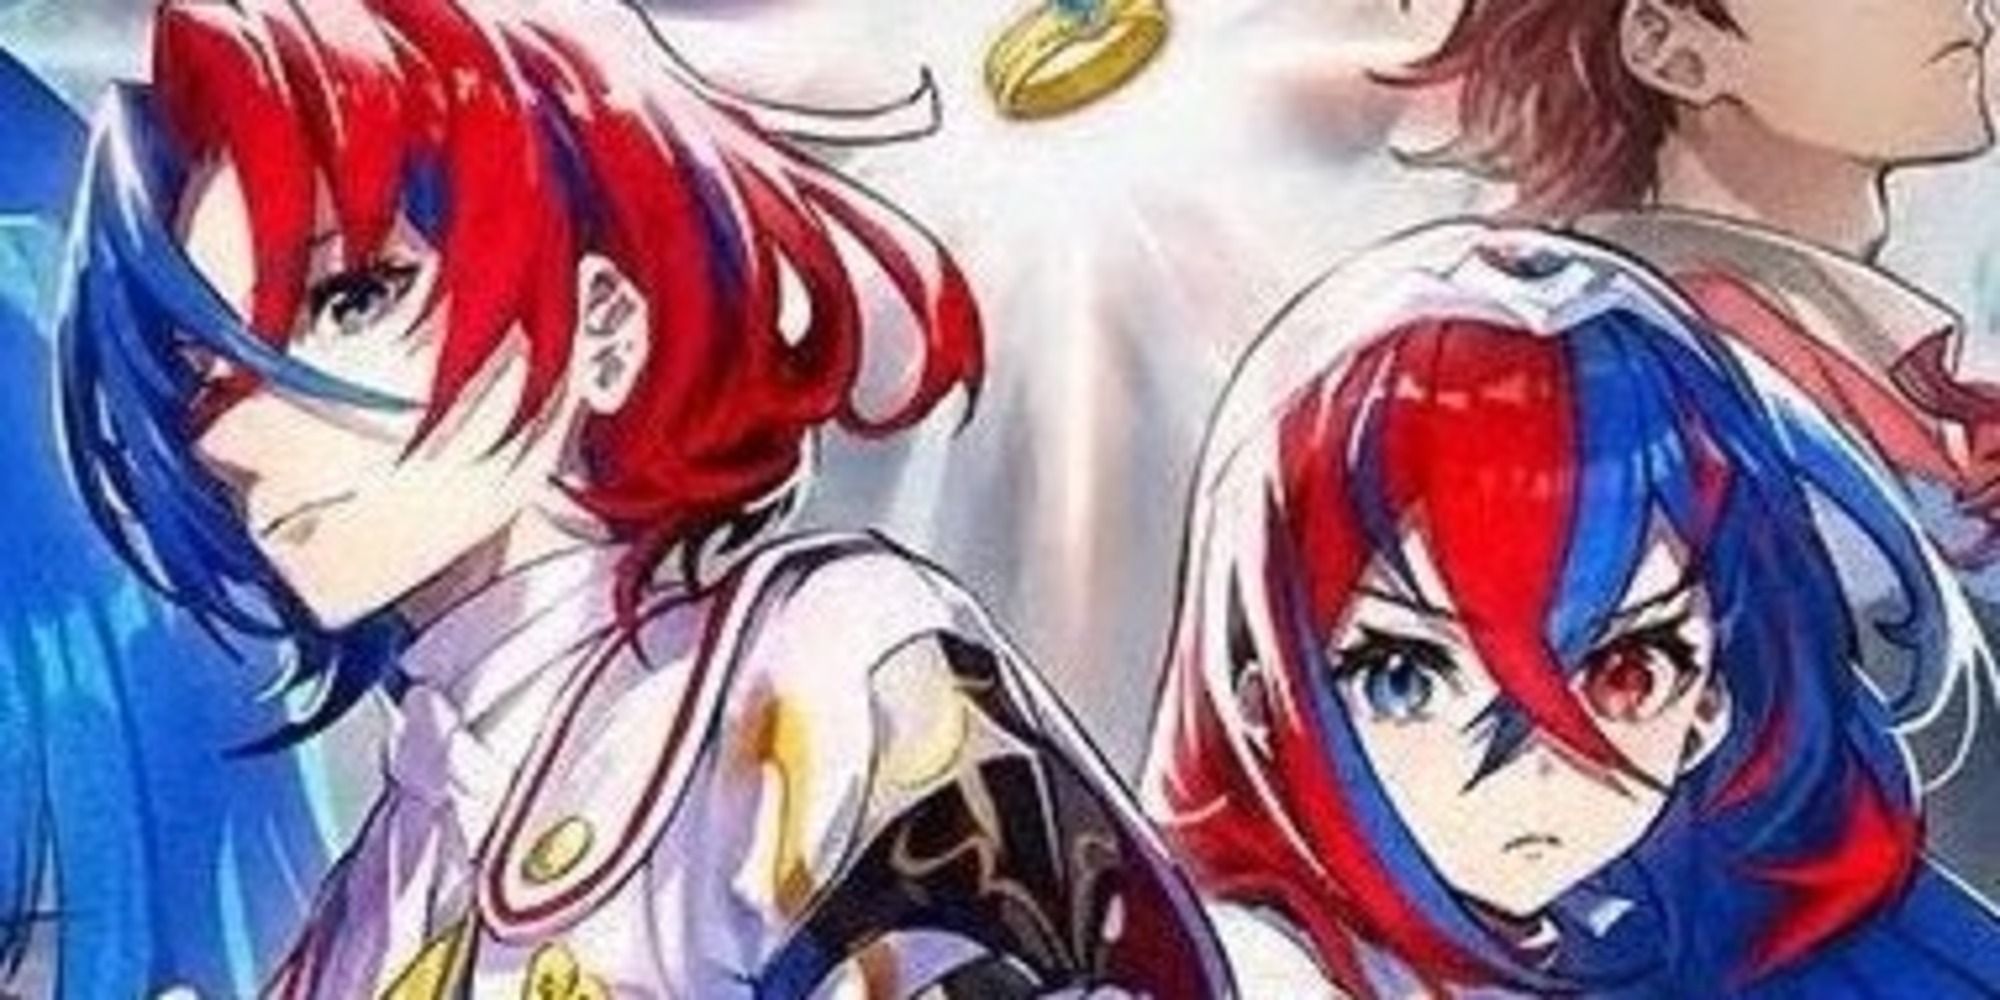 Fire Emblem Engage Alear male and female protagonist official art